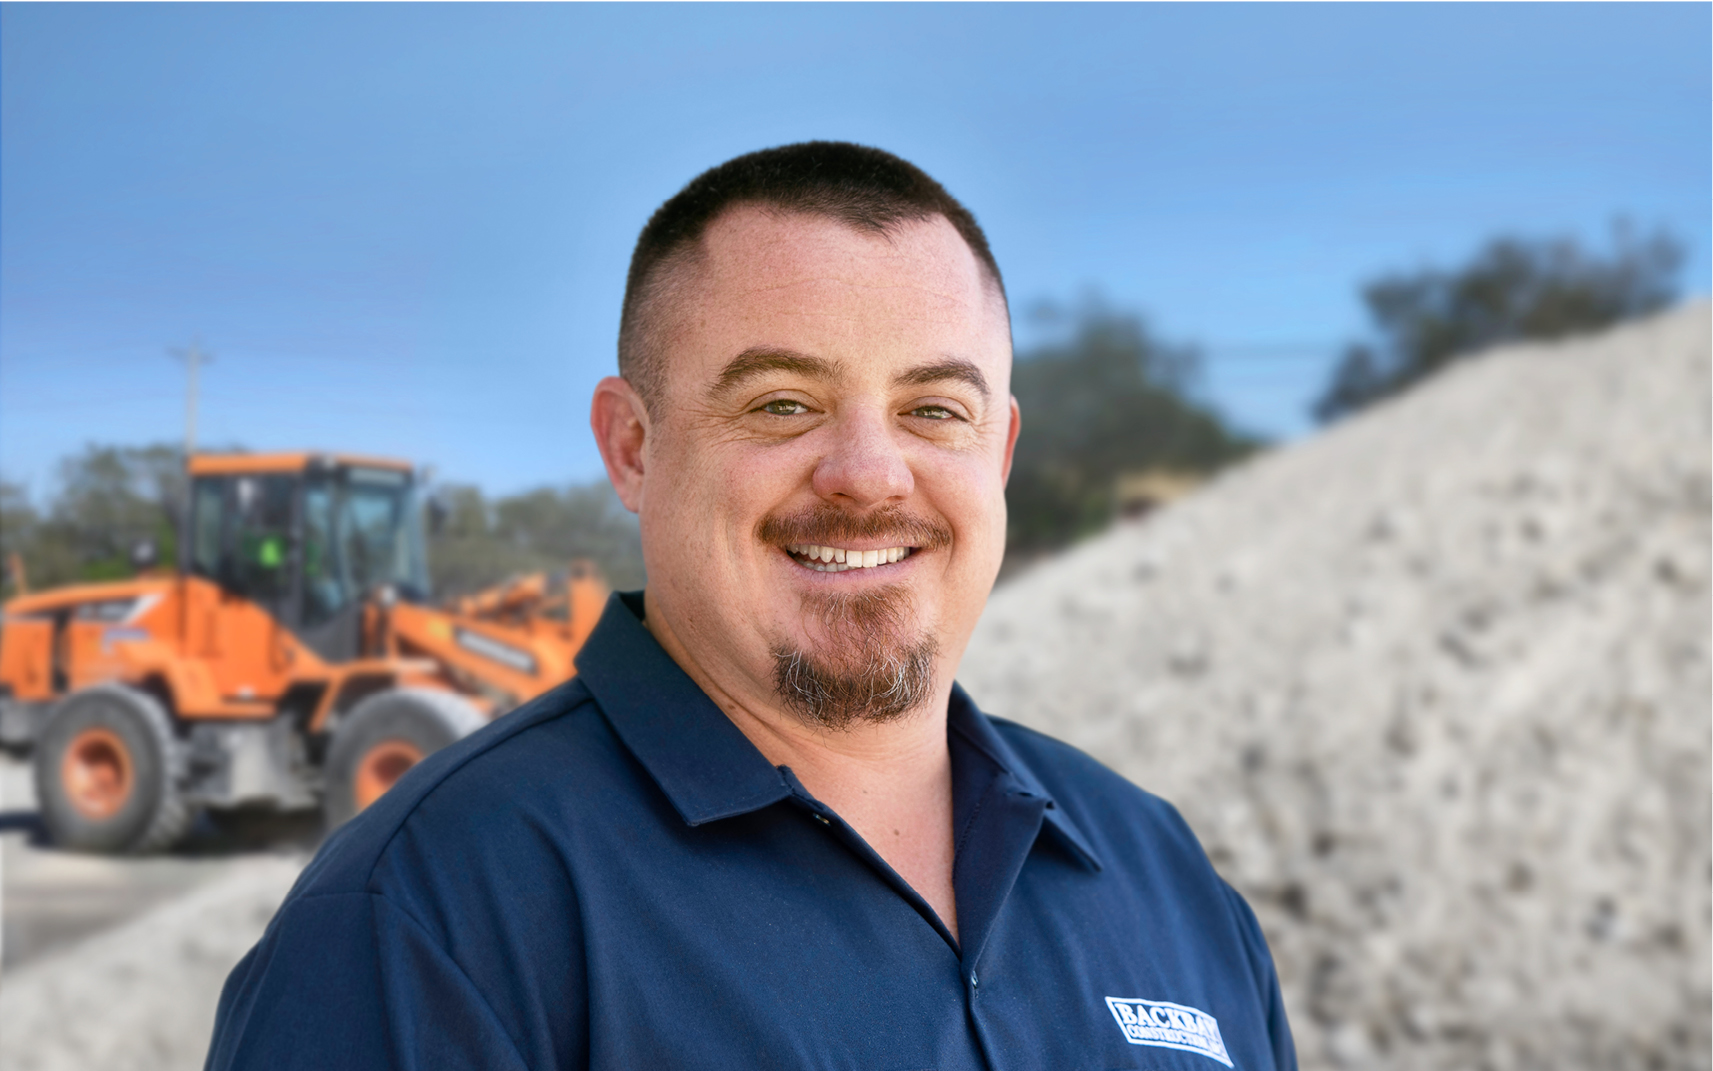 Mike Thesier is the owner of Backbay Construction, a commercial site work company in Fort Myers, Florida.